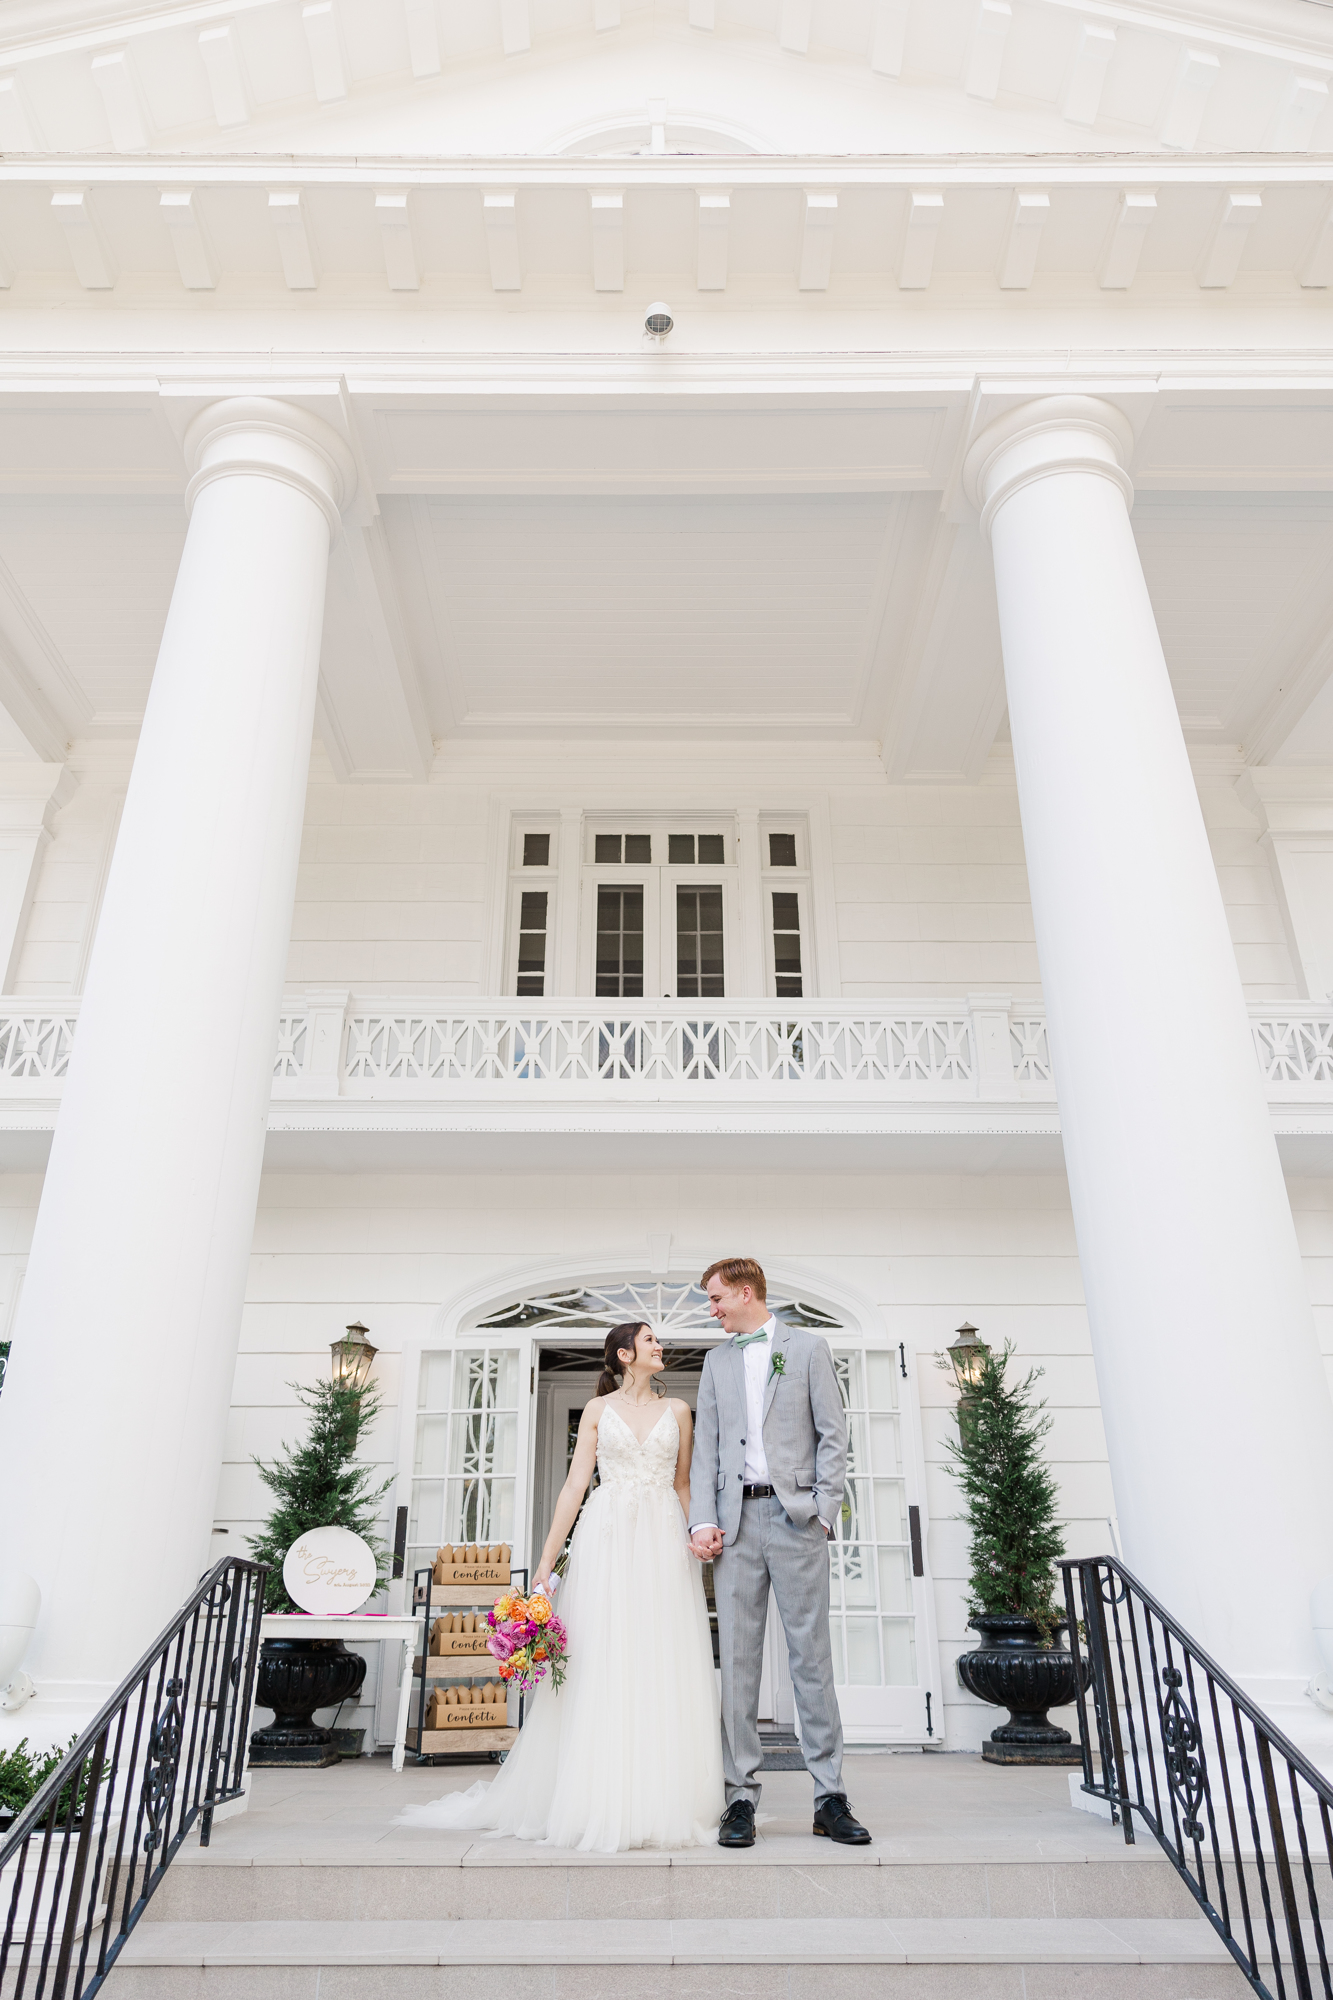 Breathtaking Wedding at Briarcliff Manor in Westchester County